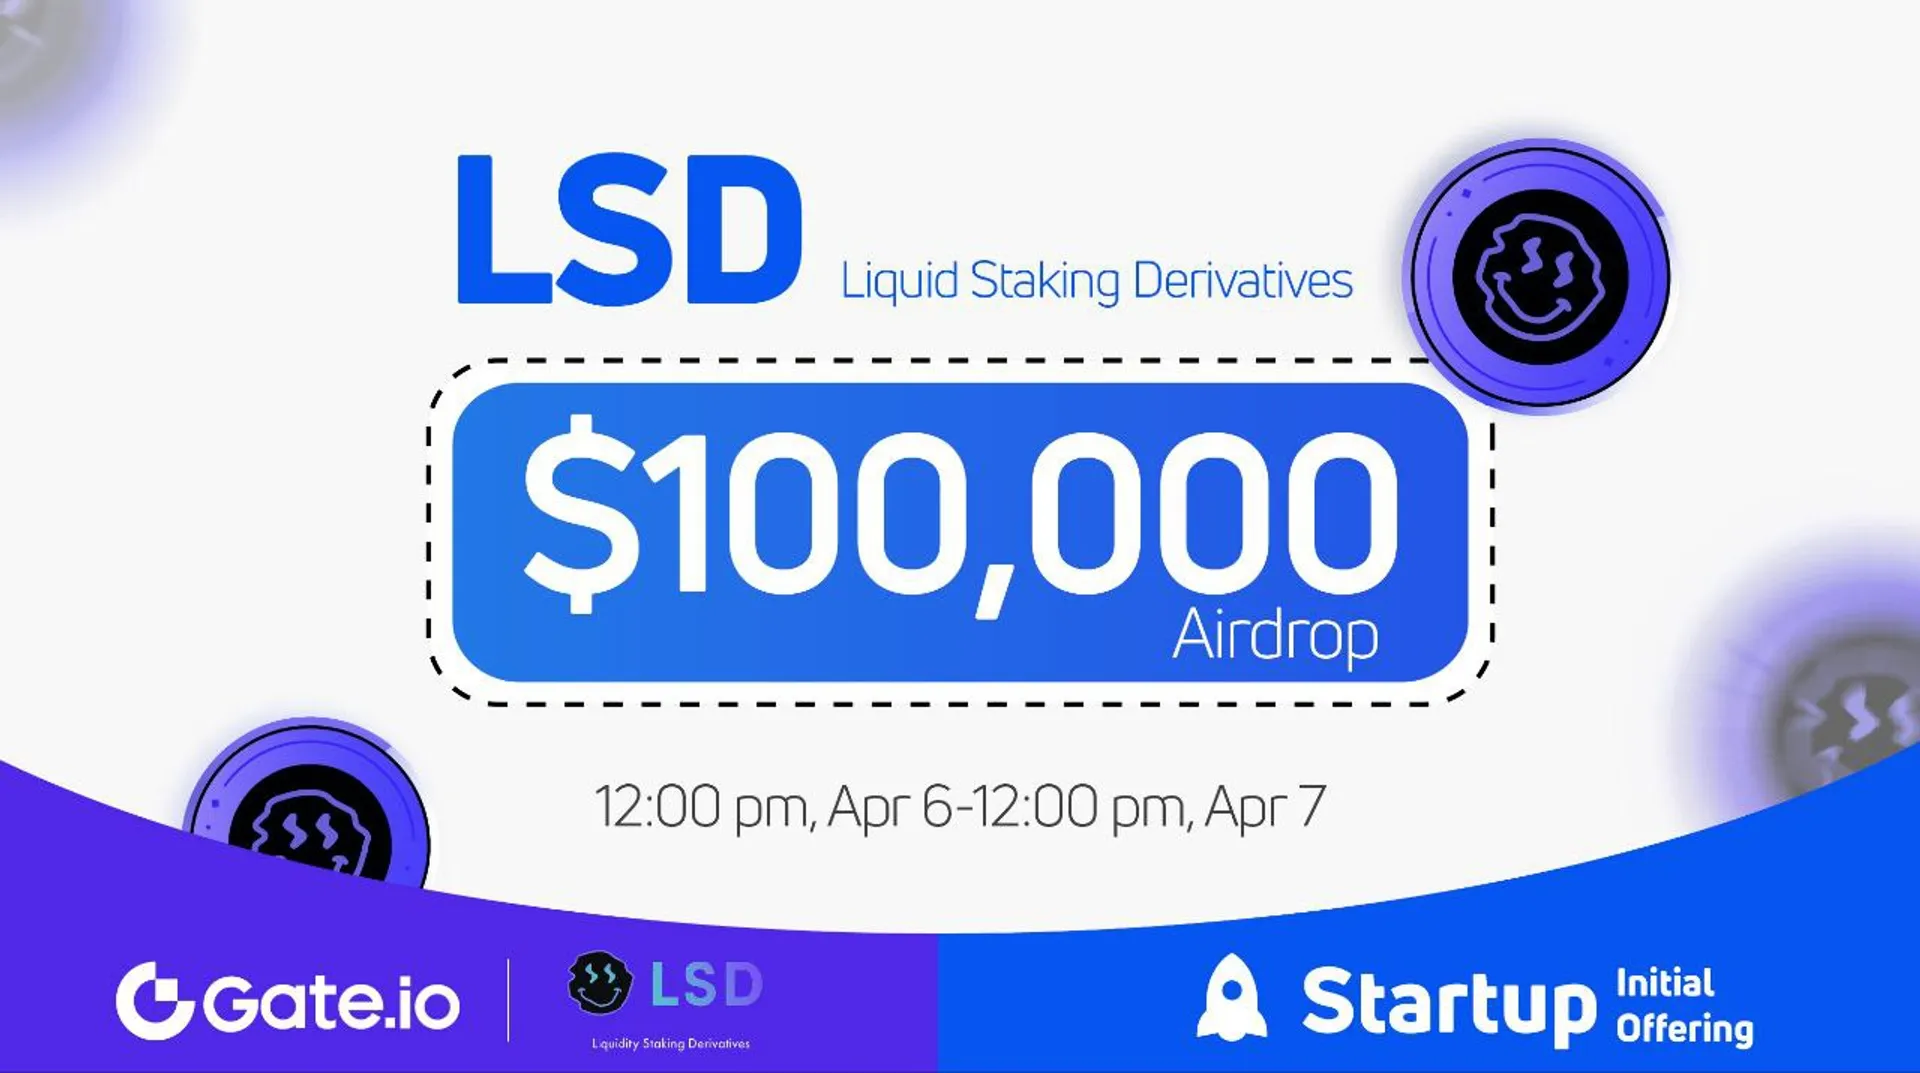 Startup Free Offering: Liquid Staking Derivative $LSD

⏰ Subscription: 12:00 PM, April 6 — April 7 (UTC)
💰 Airdrop Value: $100,000 #LSD

👉  gate.io/signup/3166634

📈 Trading Starts: 3:00 PM, April 7 (UTC)

#Airdrop #launchpad #newcoin #Crypto #cryptocurrencies #investing #listing #cryptotrade #crypto2023 #cryptoworld #cryptonews